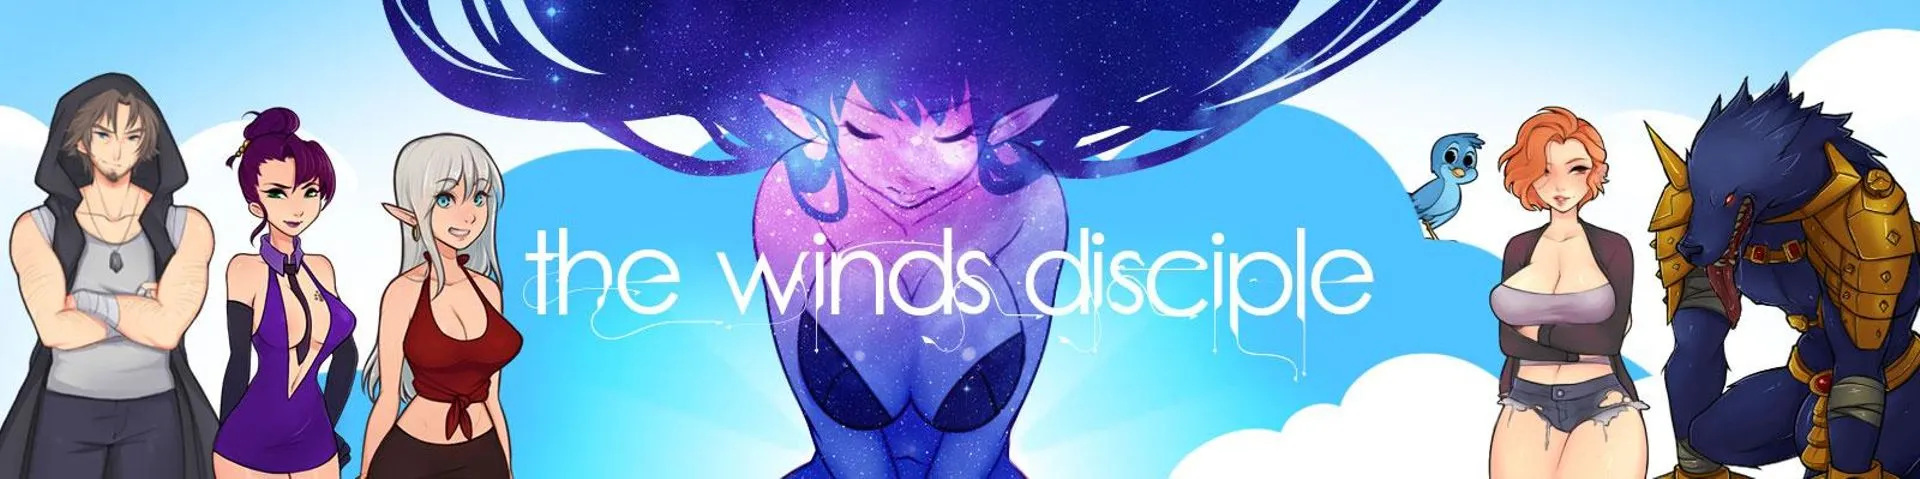 The Wind's Disciple main image